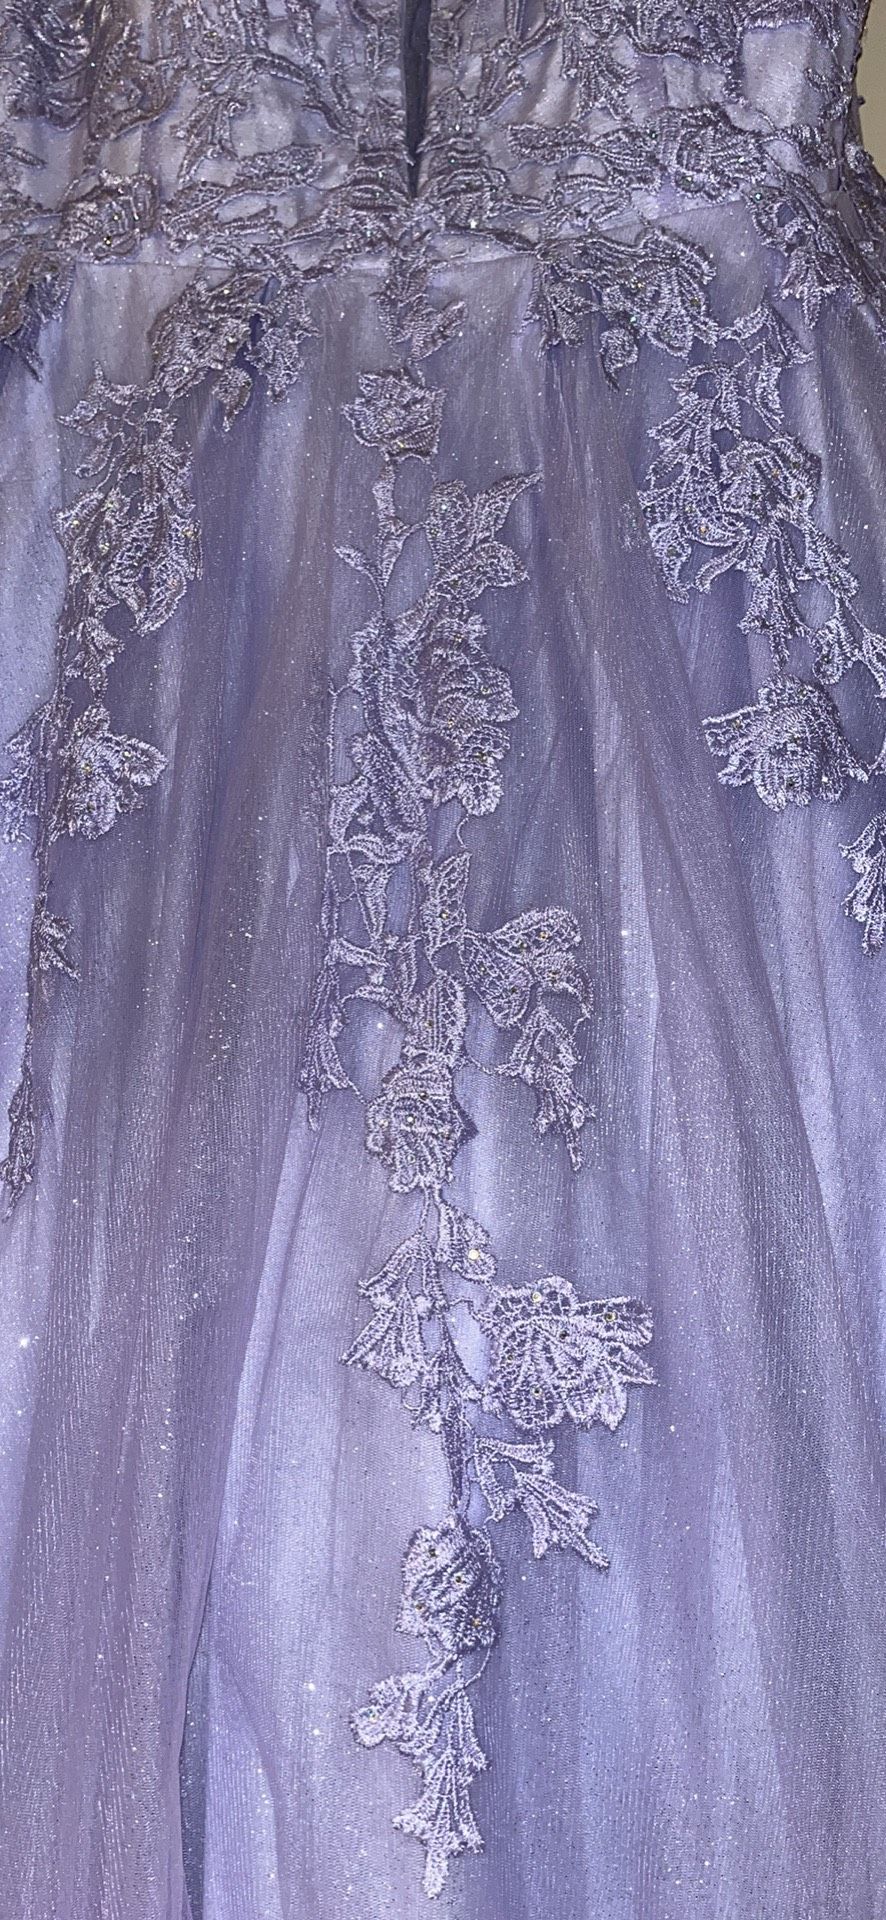 Plus Size 18 Prom Lace Purple Ball Gown on Queenly